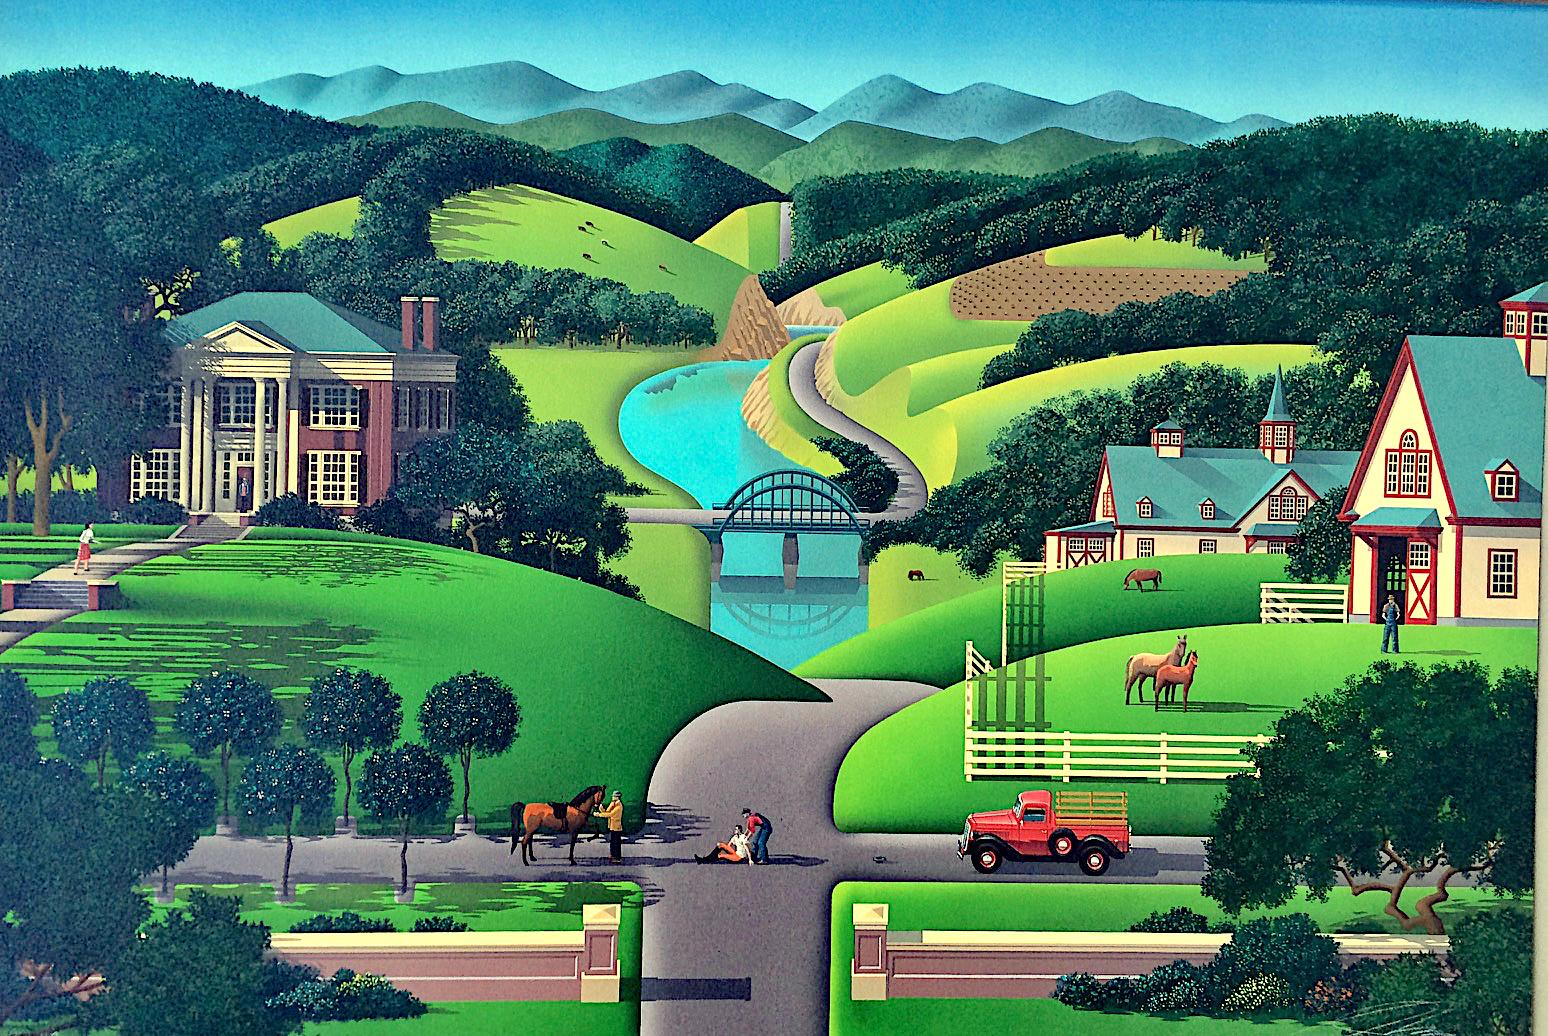 Jim Buckels Landscape Print - TROUBLE AT WALNUT RIDGE Signed Lithograph, Farm Country, Green Hills, Horses